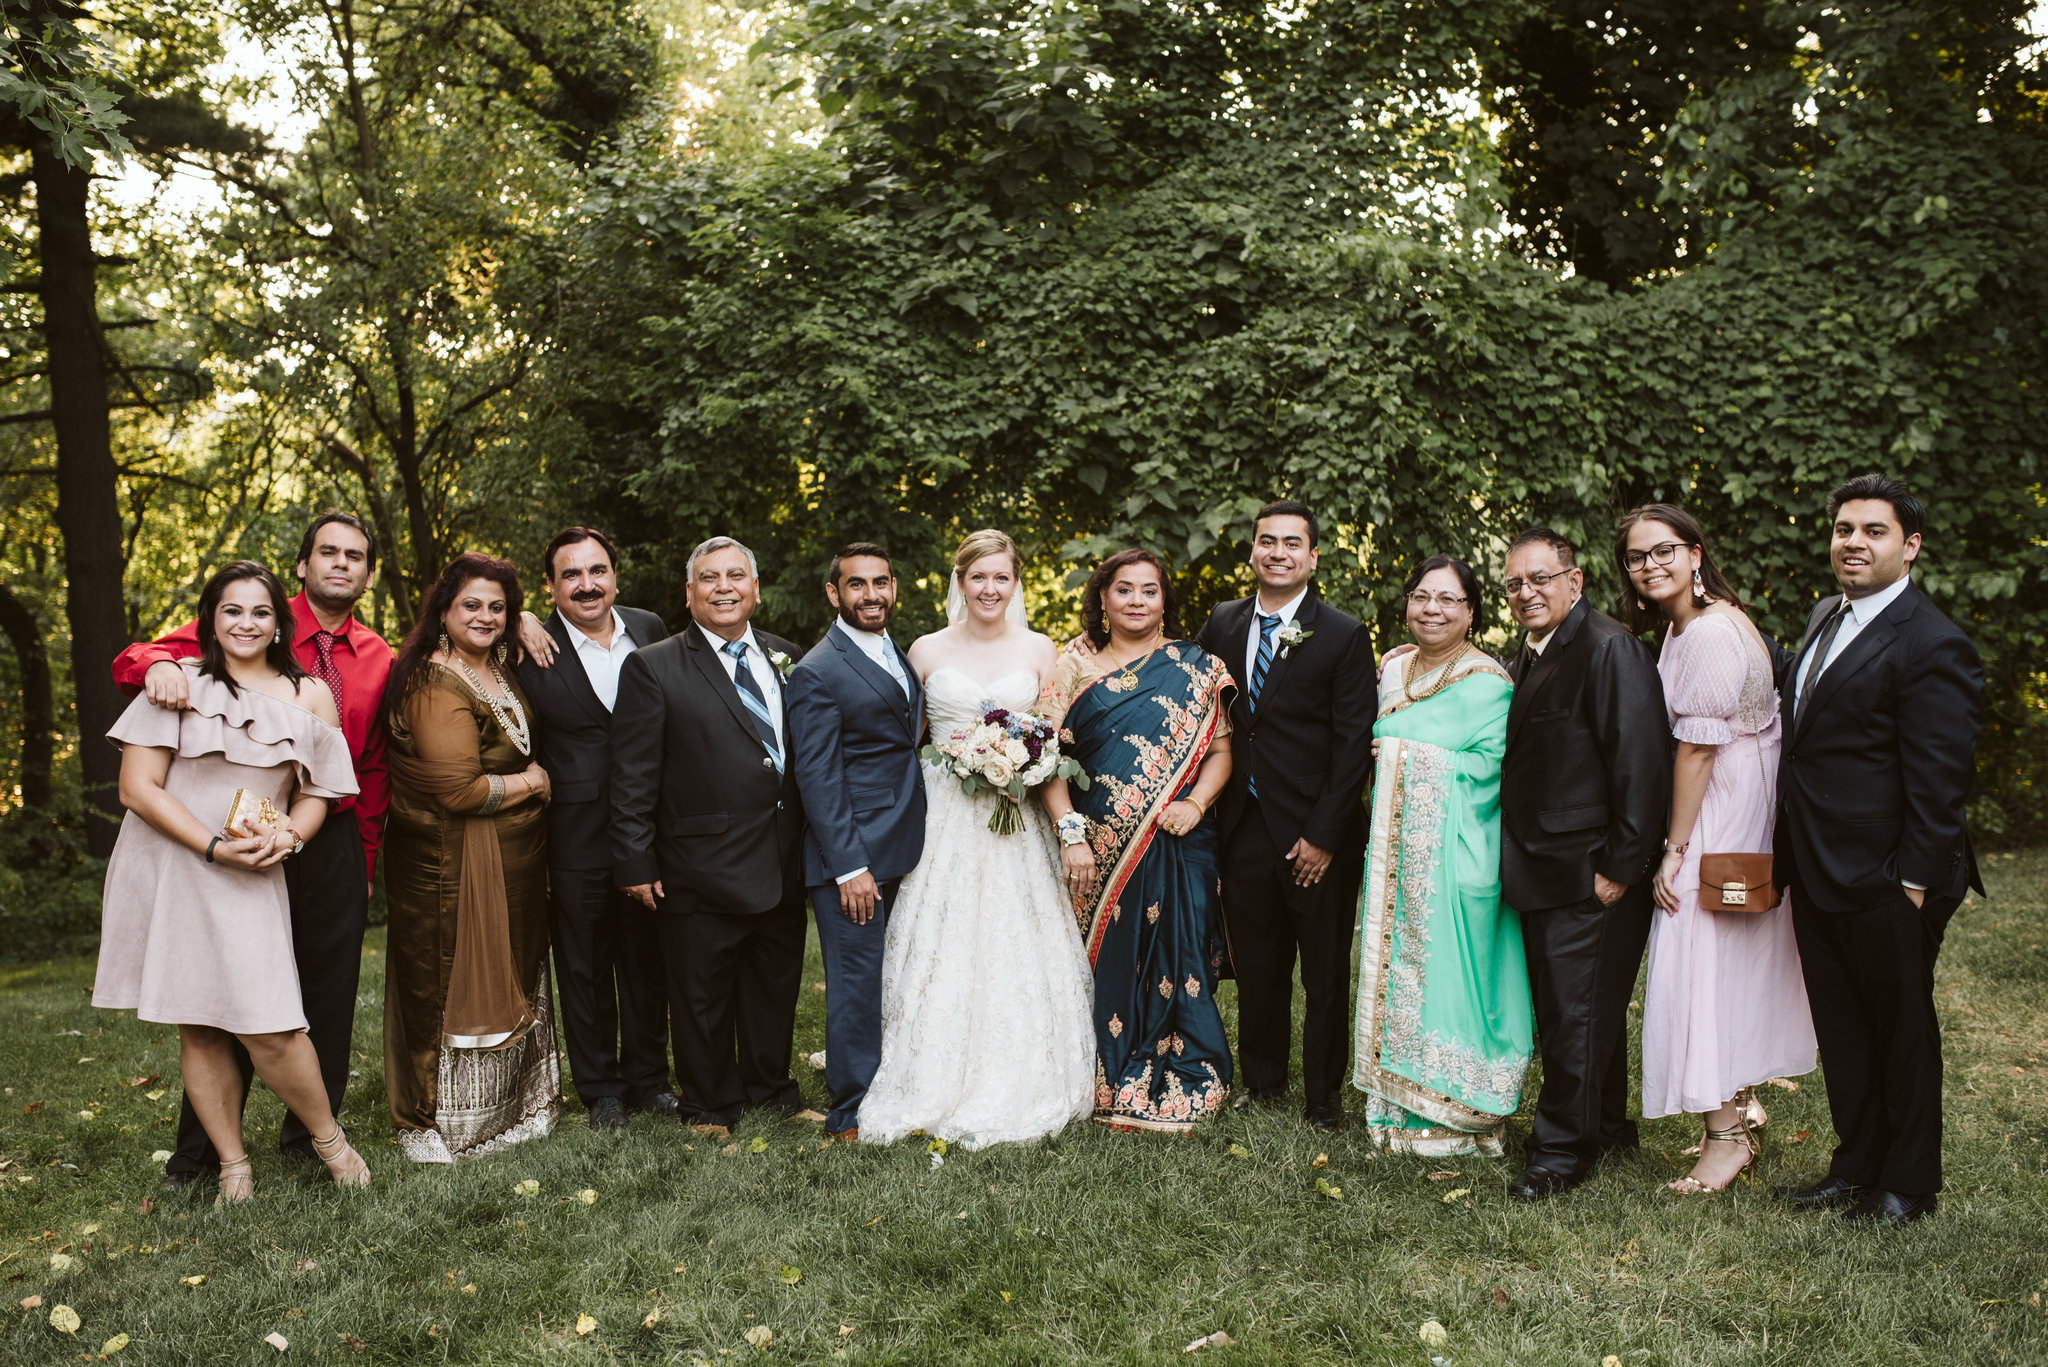  Ellicott City, Baltimore Wedding Photographer, Wayside Inn, Summer Wedding, Romantic, Traditional, Portrait of Bride and Groom with Family 